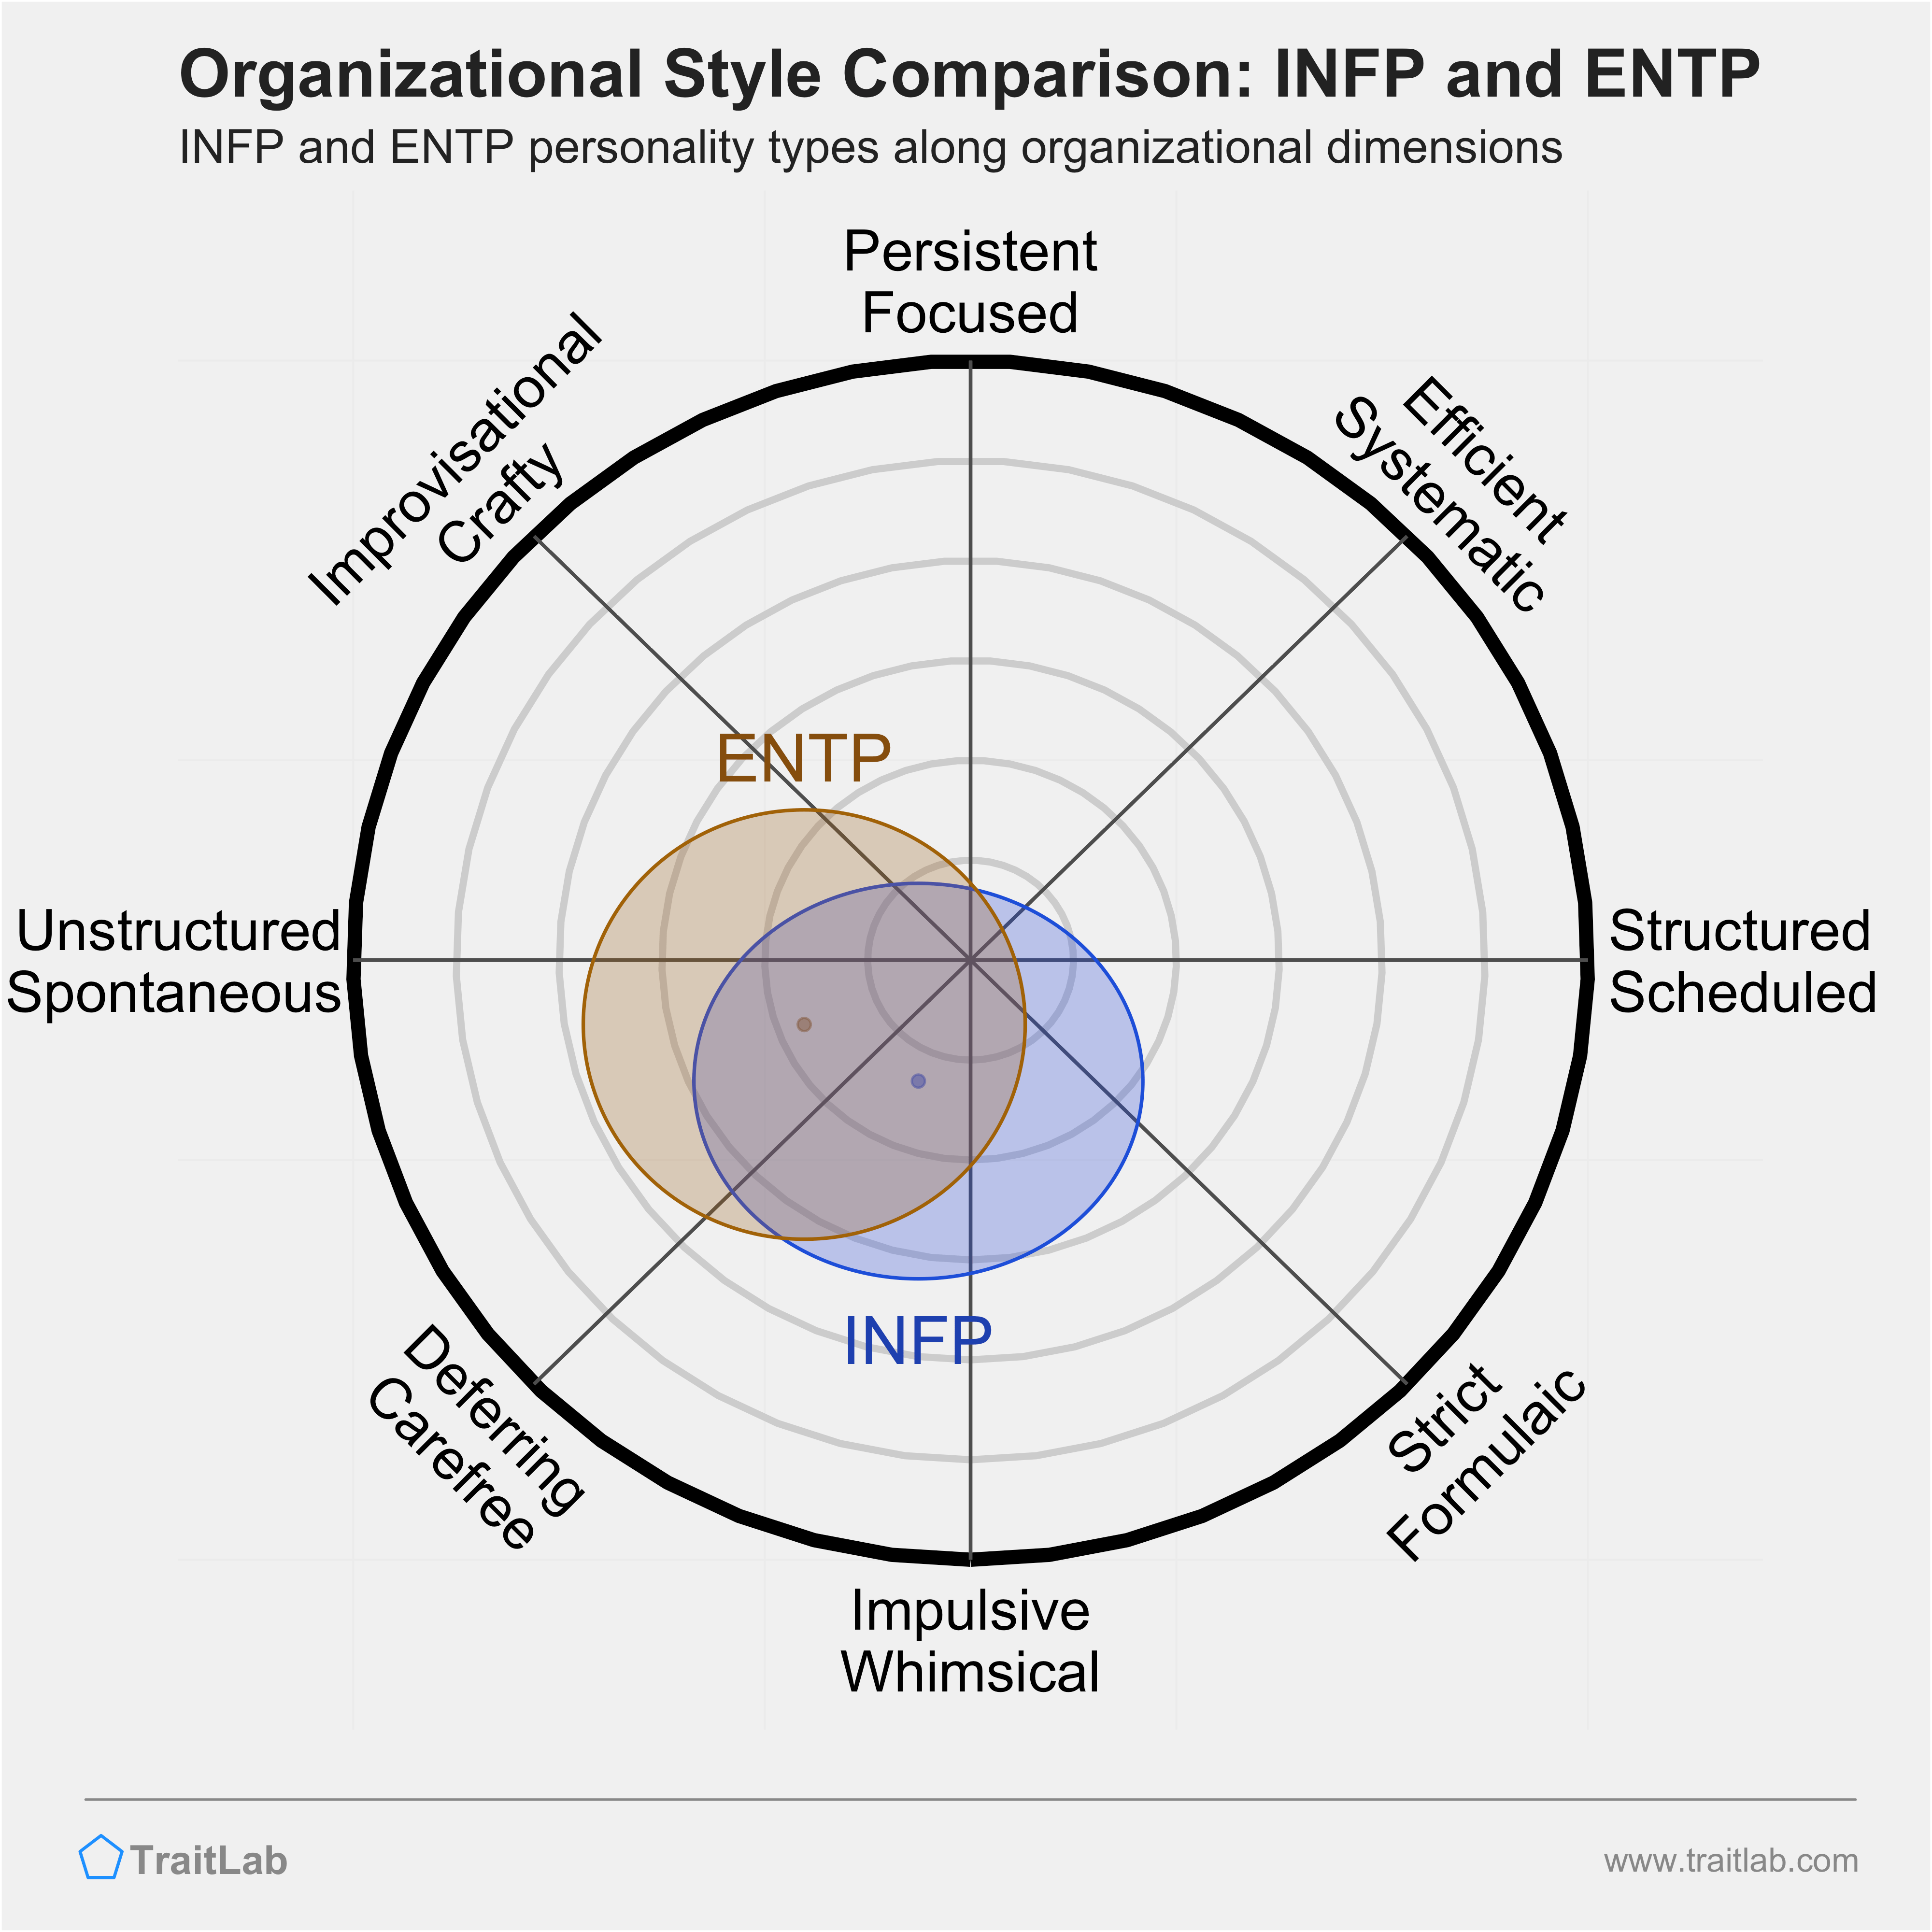 INFP and ENTP comparison across organizational dimensions